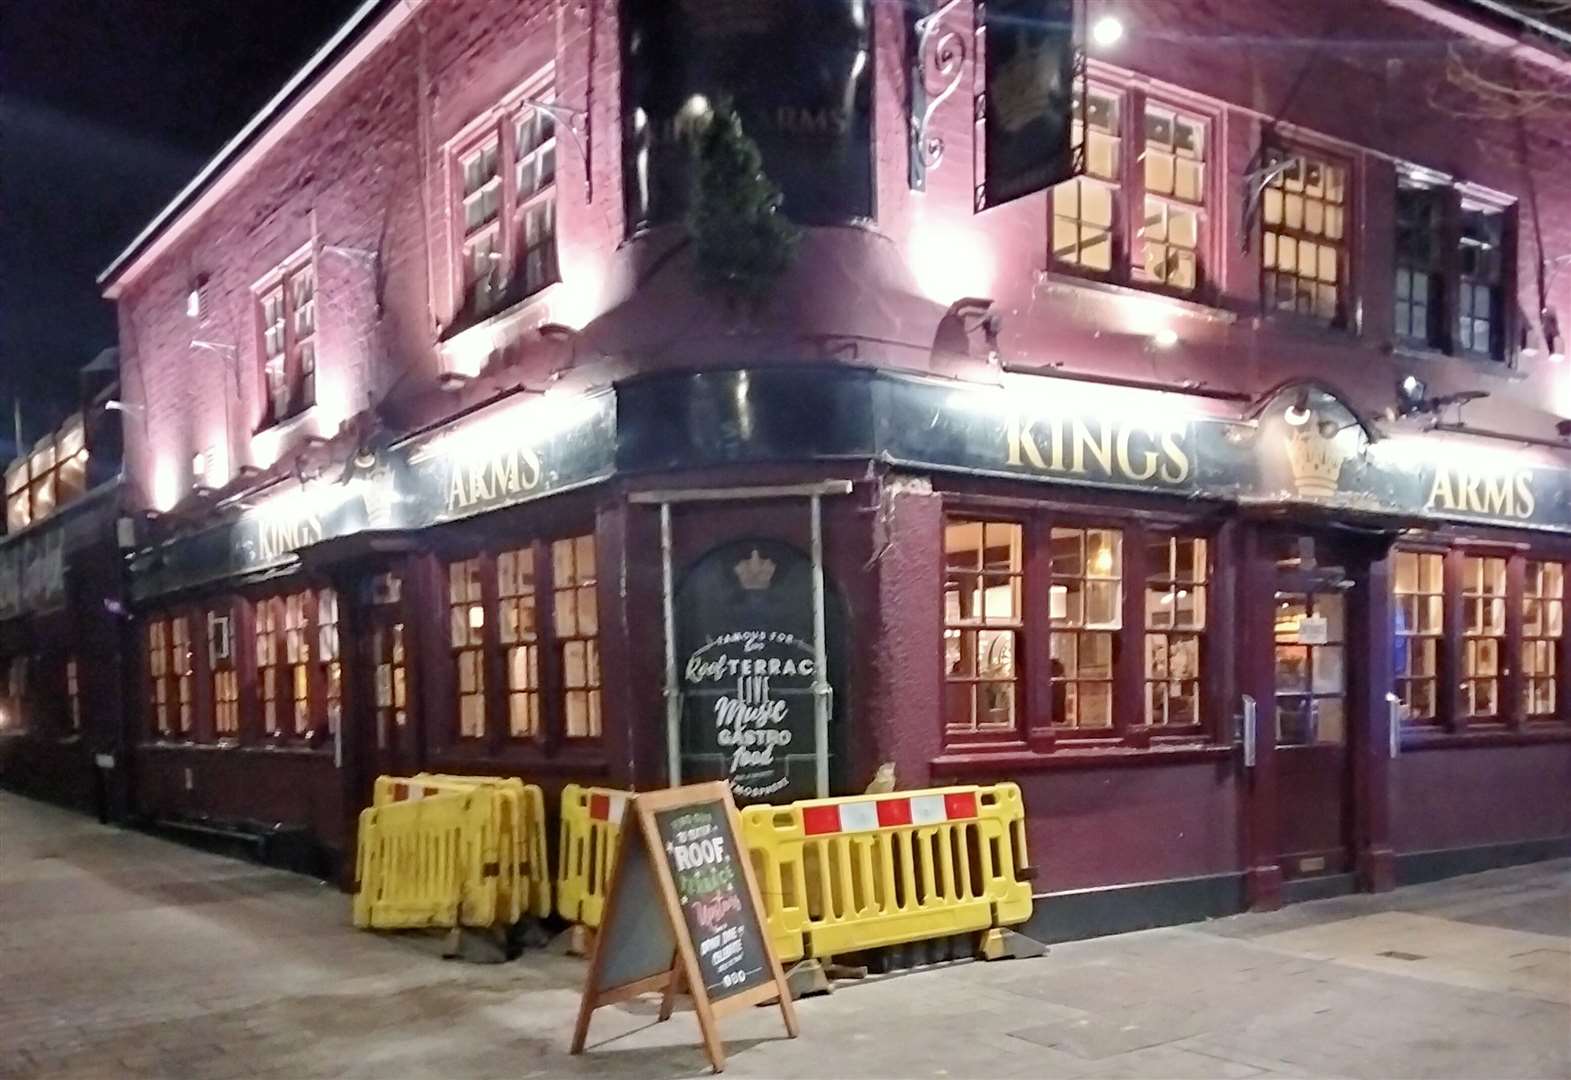 Kings Arms pub in Broadway, Bexleyheath after the crash